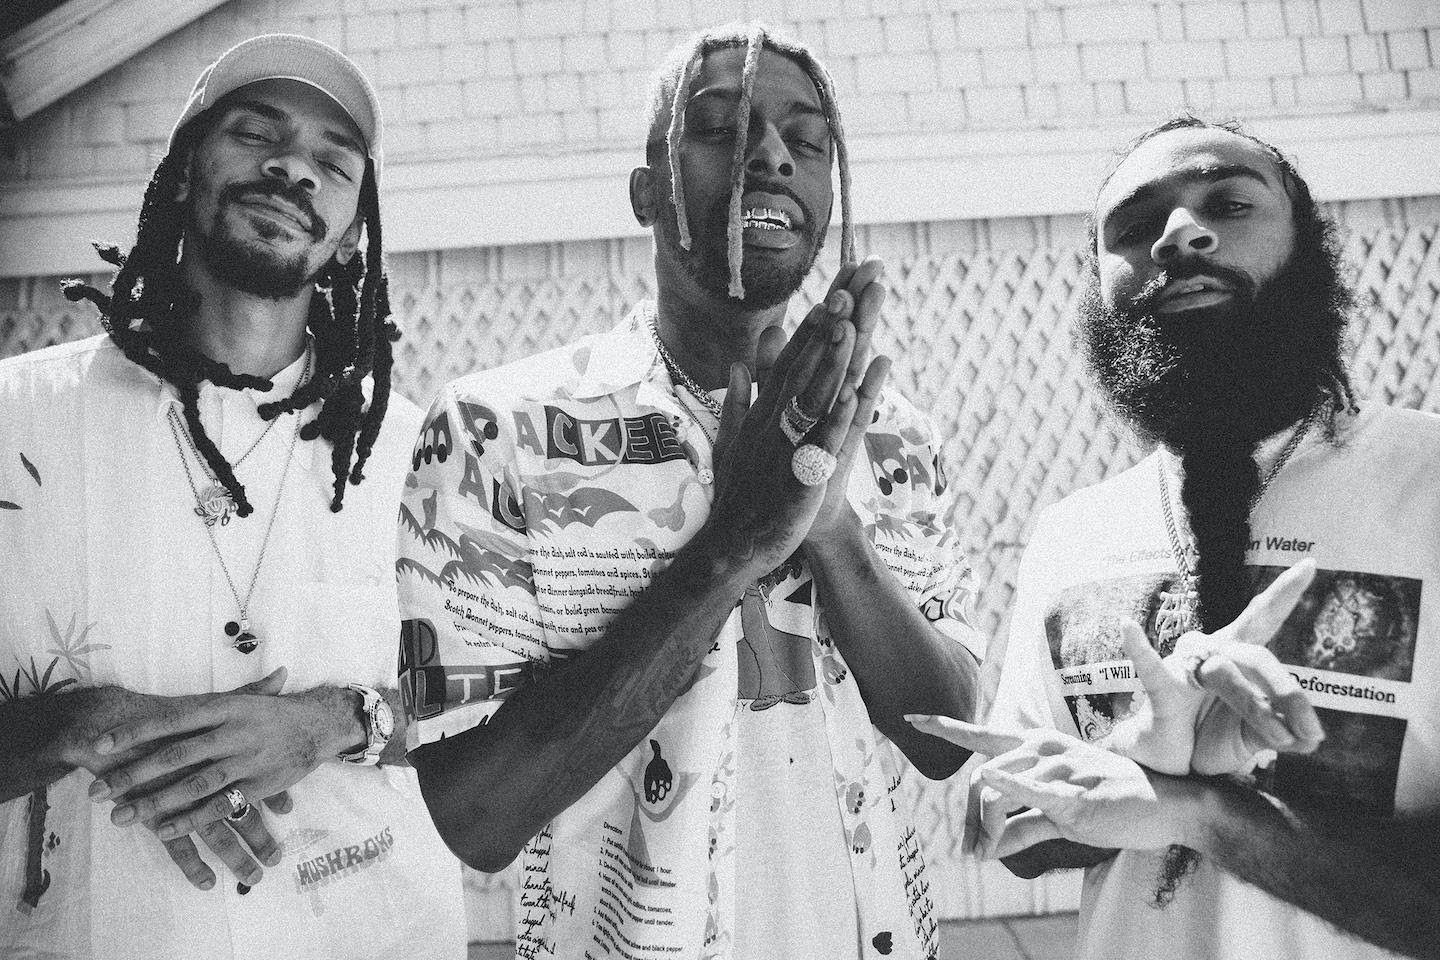 Flatbush Zombies drop a new song “Afterlife”, produced by James Blake. Erick the Architect initially connected with James Blake via Twitter after hearing